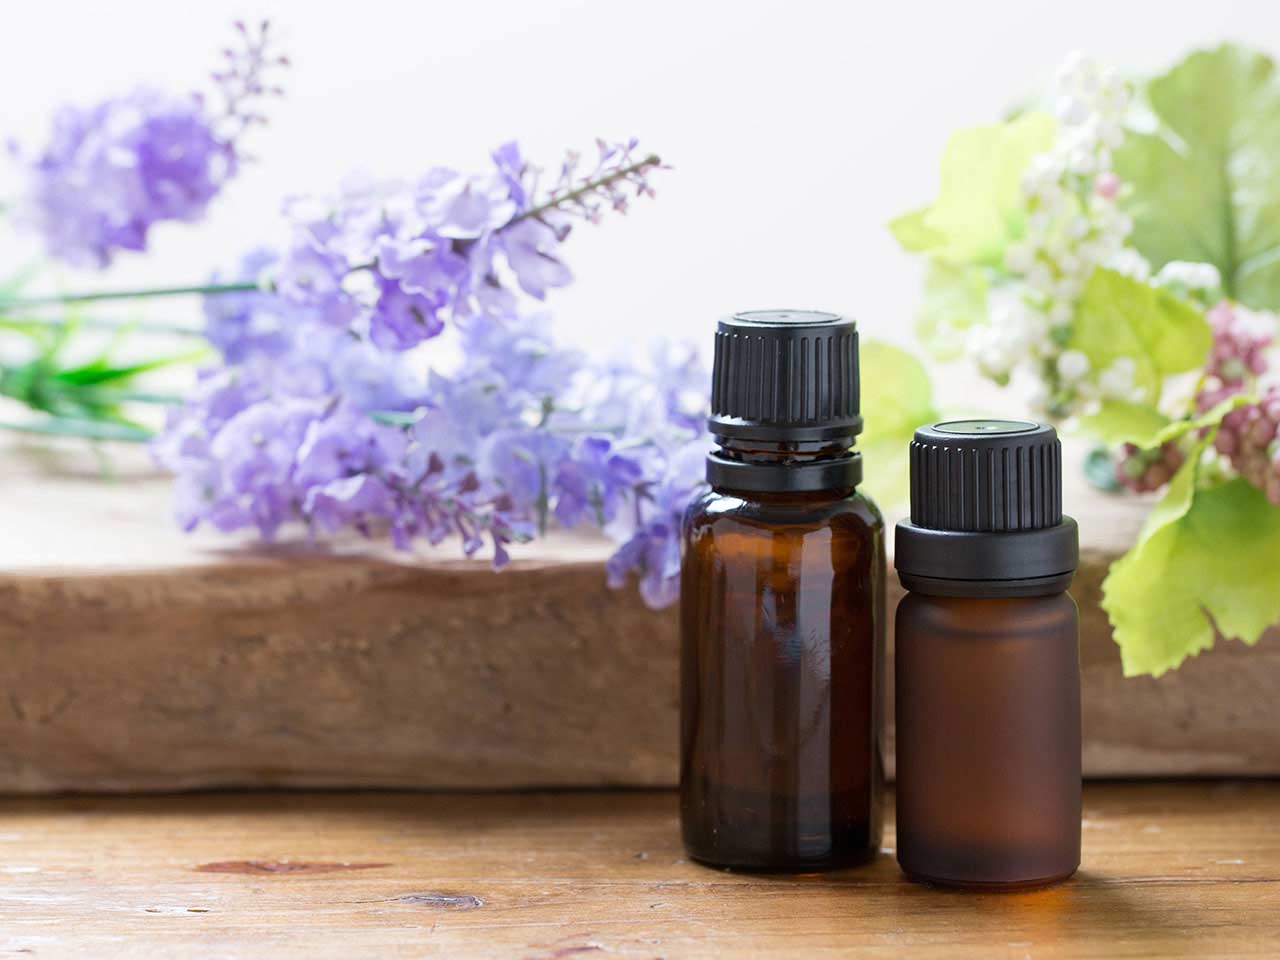 aromatherapy-what-is-it-shutterstock.jpg